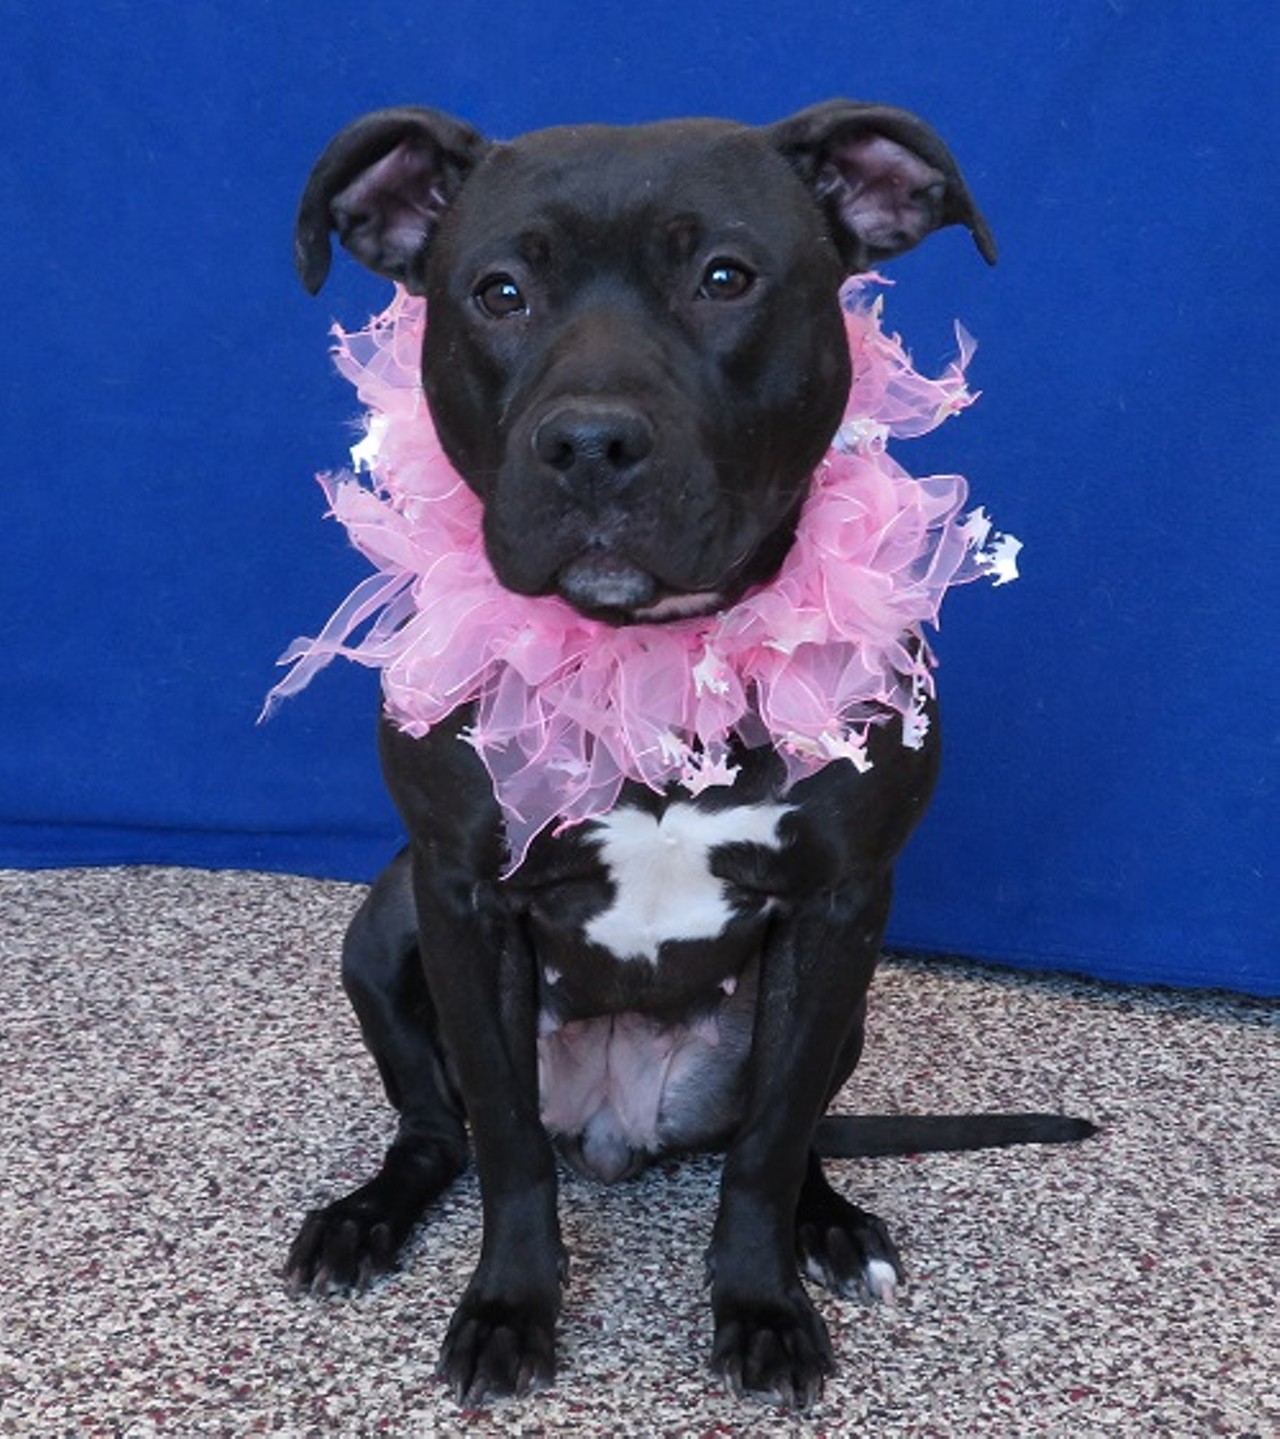 NAME: Avianna
GENDER: Female 
BREED: Pit Bull 
AGE: 3 years, 1 month 
WEIGHT: 36 pounds 
SPECIAL CONSIDERATIONS: None 
REASON I CAME TO MHS: Rescued in Detroit
LOCATION: Petco of Sterling Heights
ID NUMBER: 866059